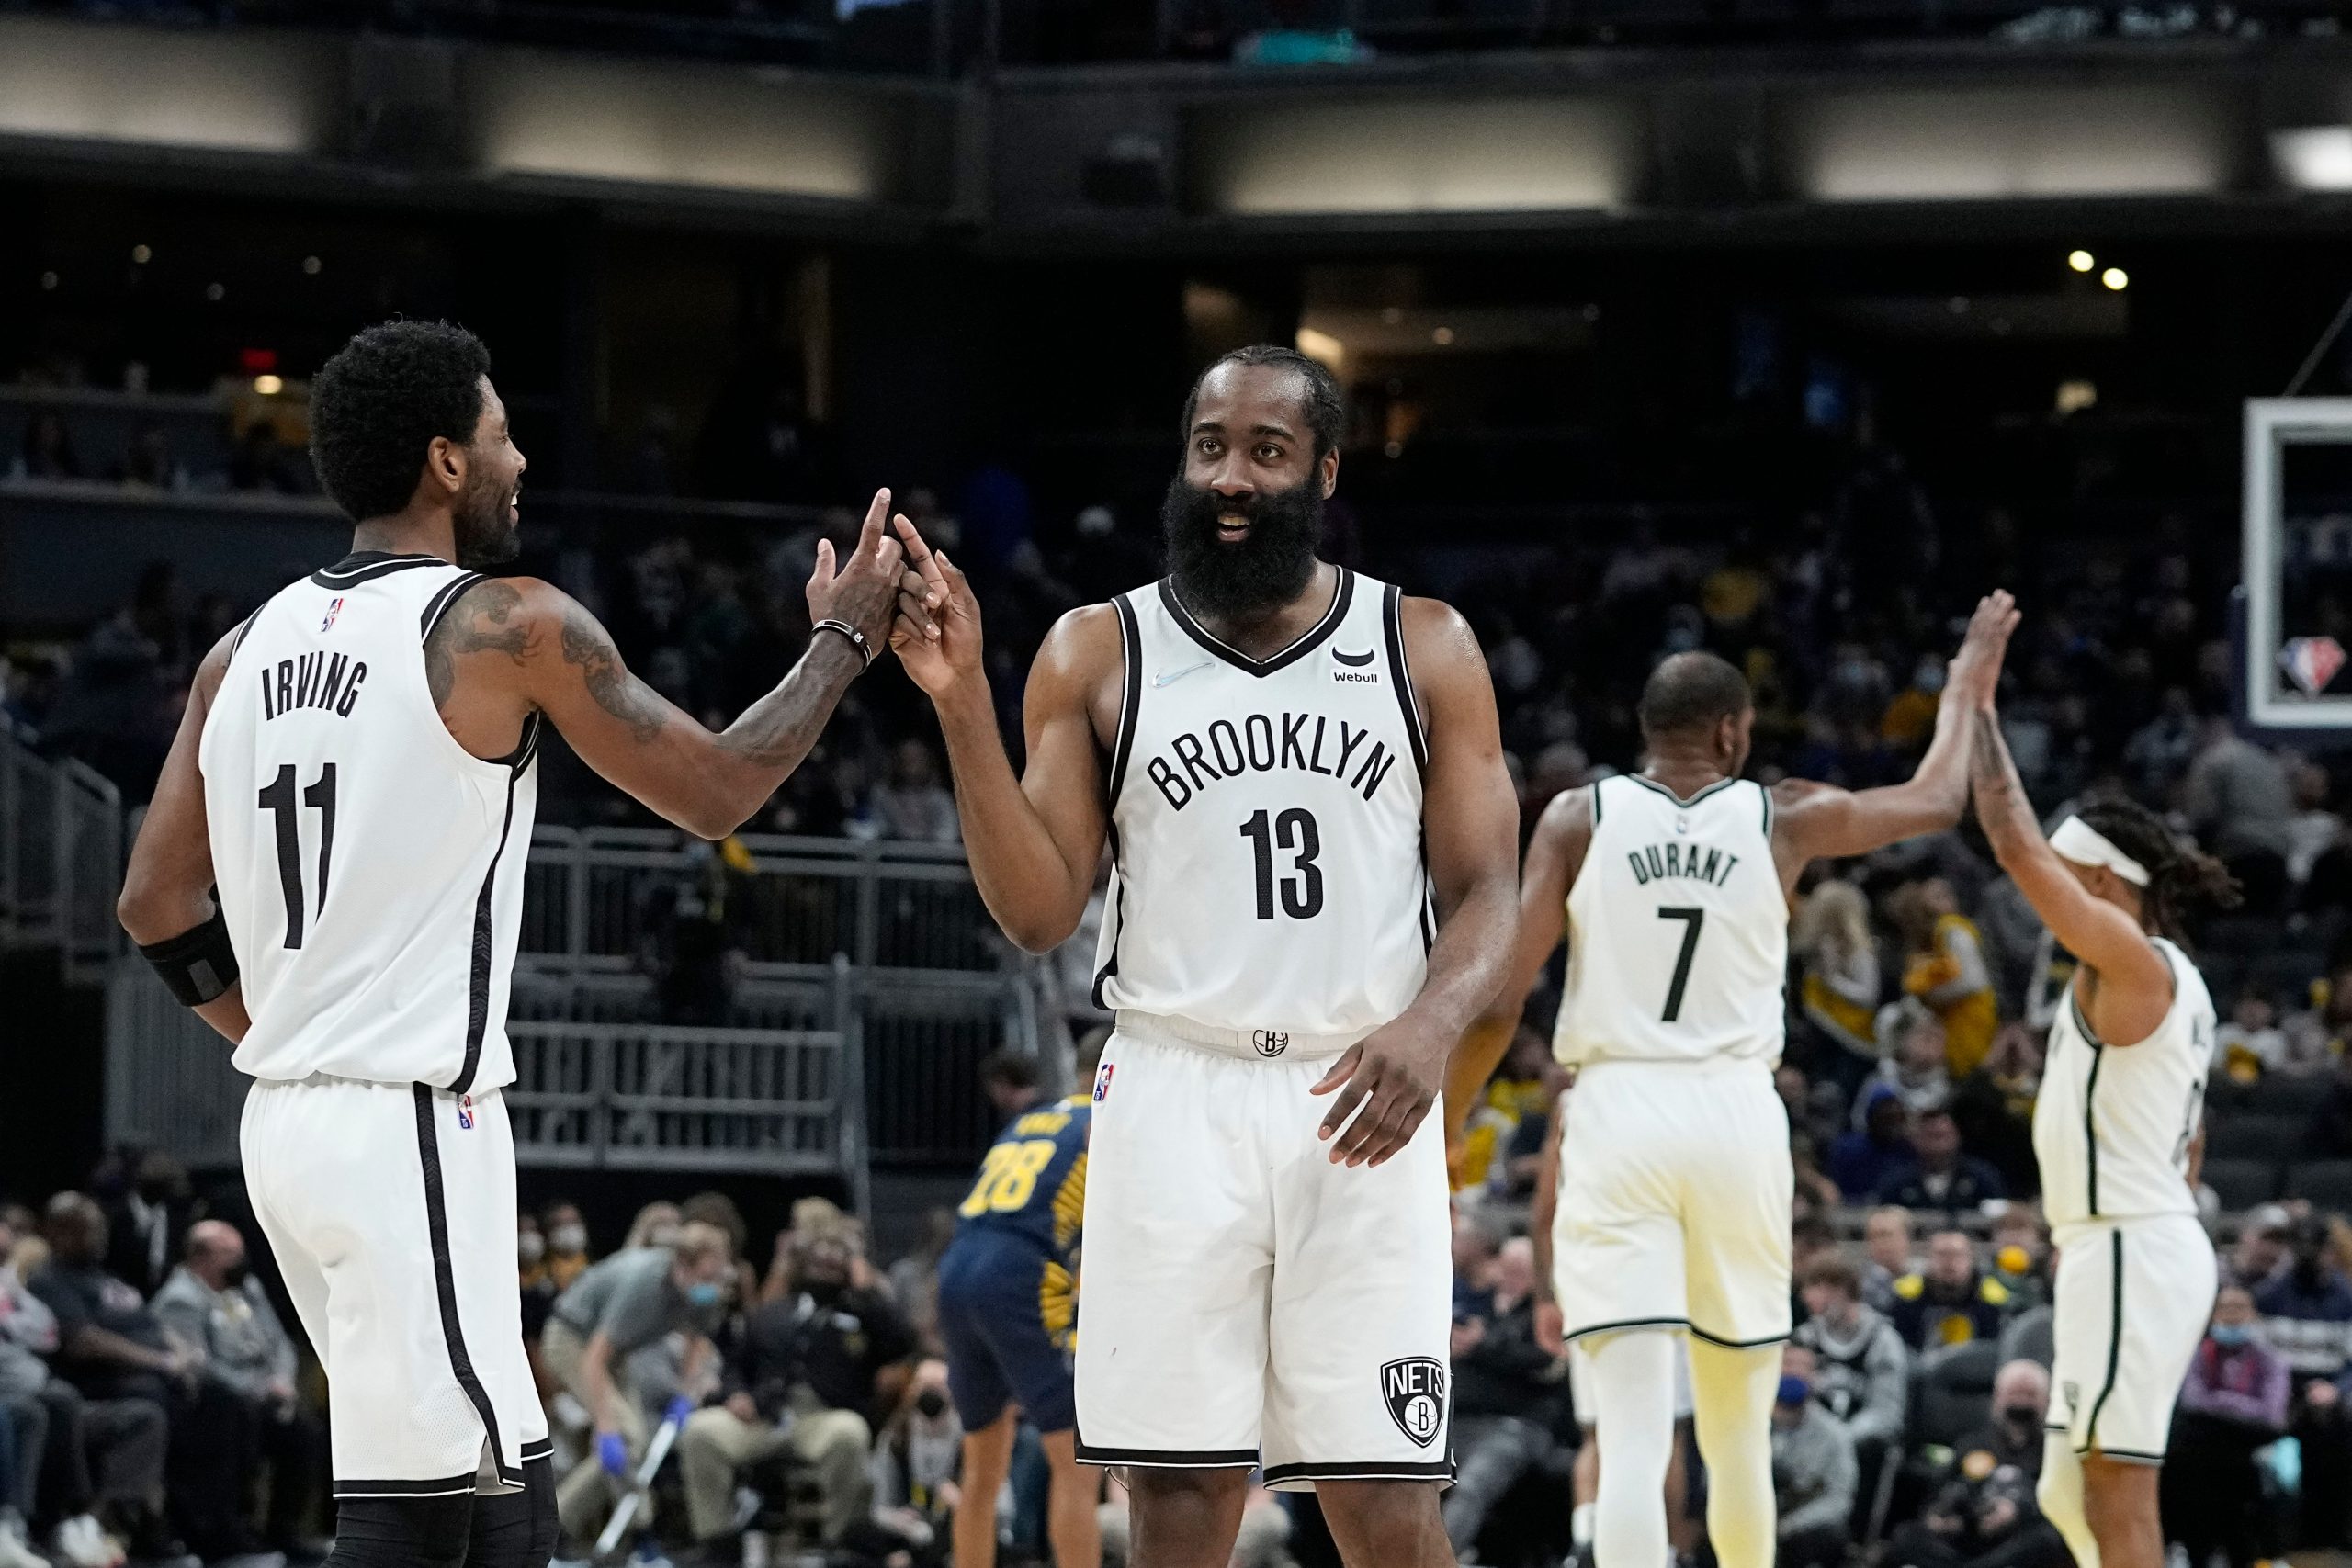 NBA: Kyrie Irving helps Brooklyn Nets charge past Indiana Pacers in his season debut